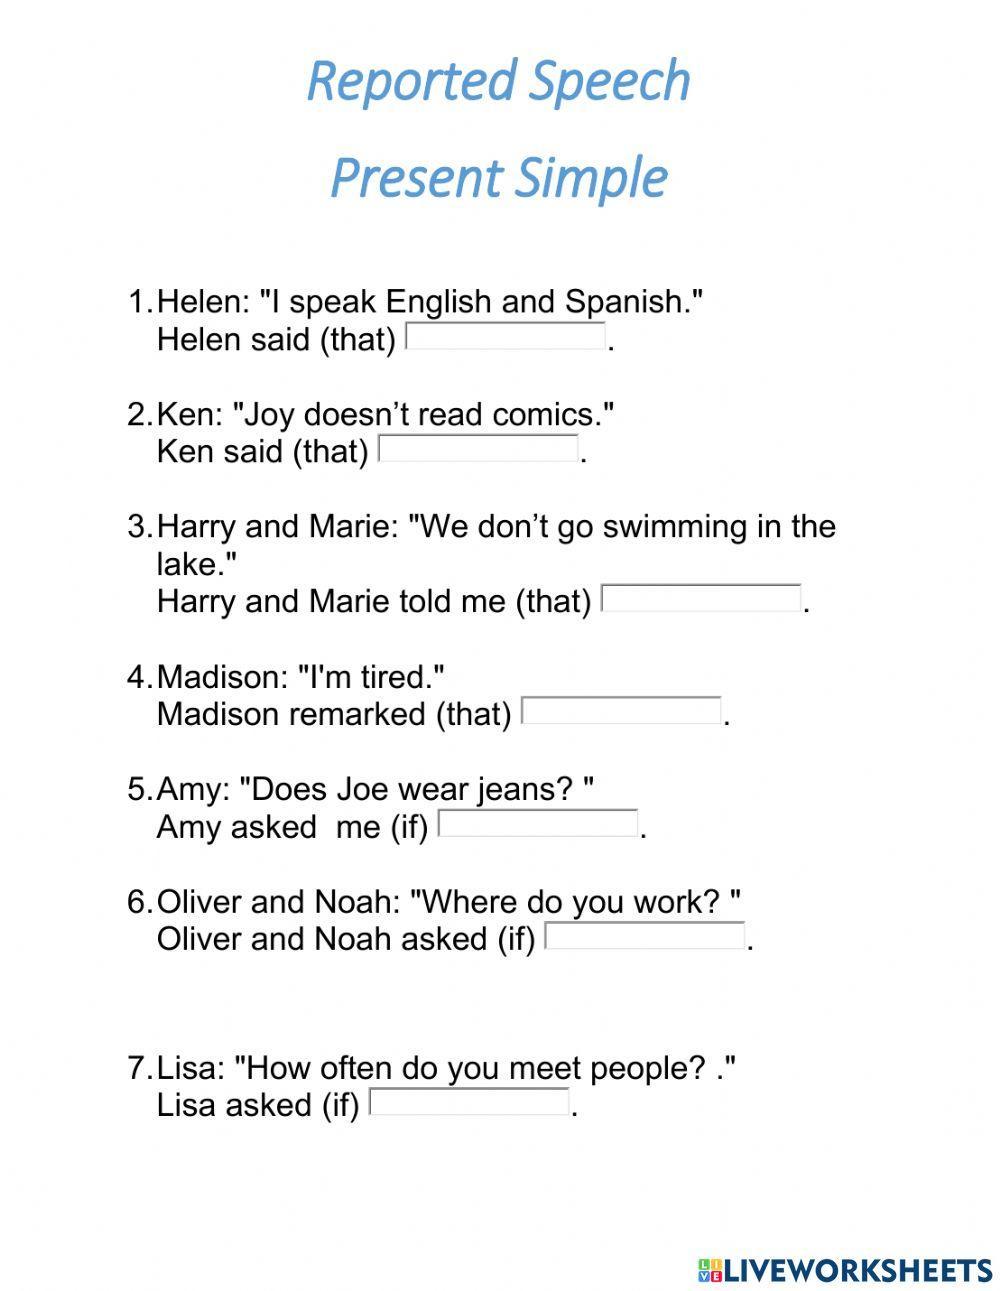 reported speech present simple exercises